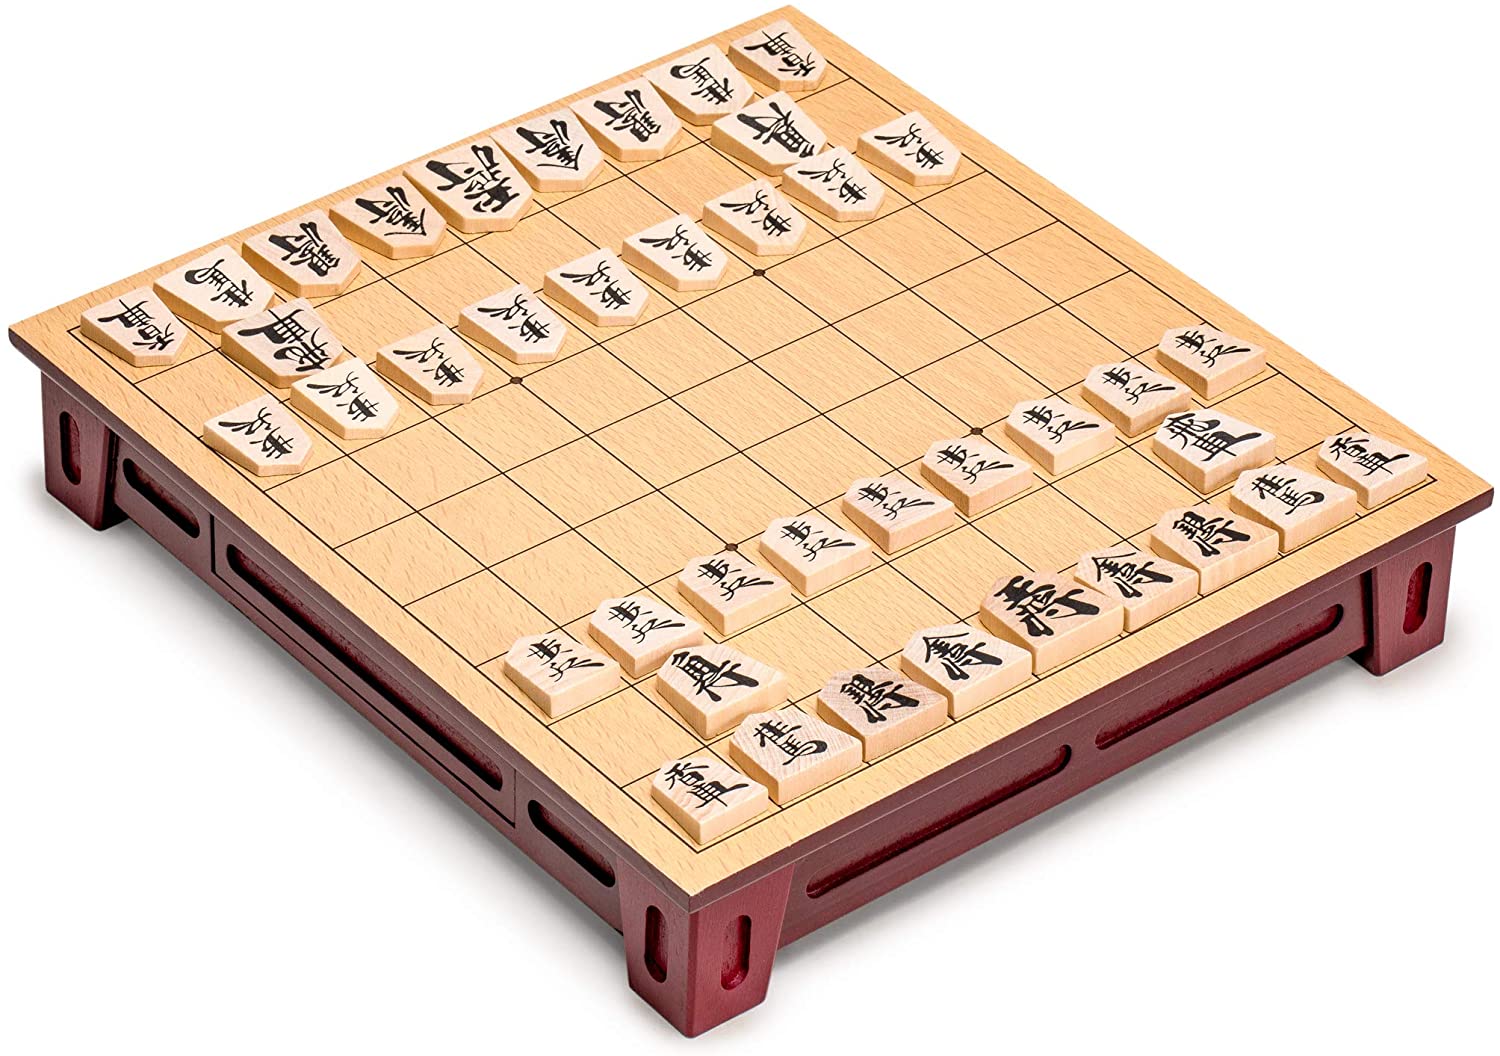 As chess players would you give shogi a try if there were readily